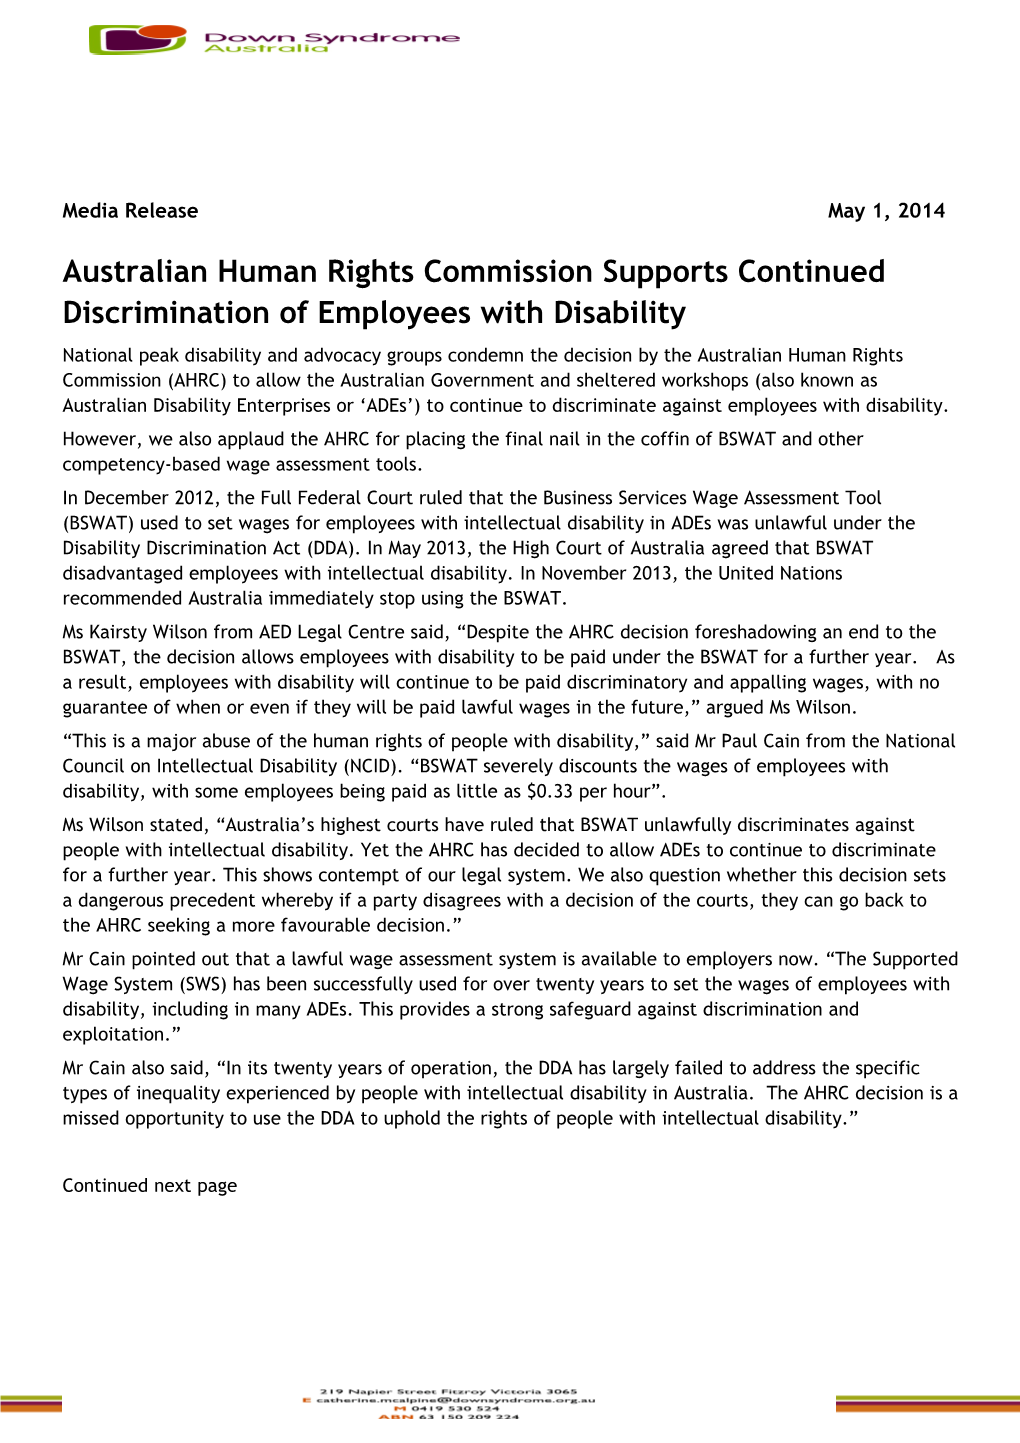 Australian Human Rights Commission Supports Continued Discrimination of Employees With